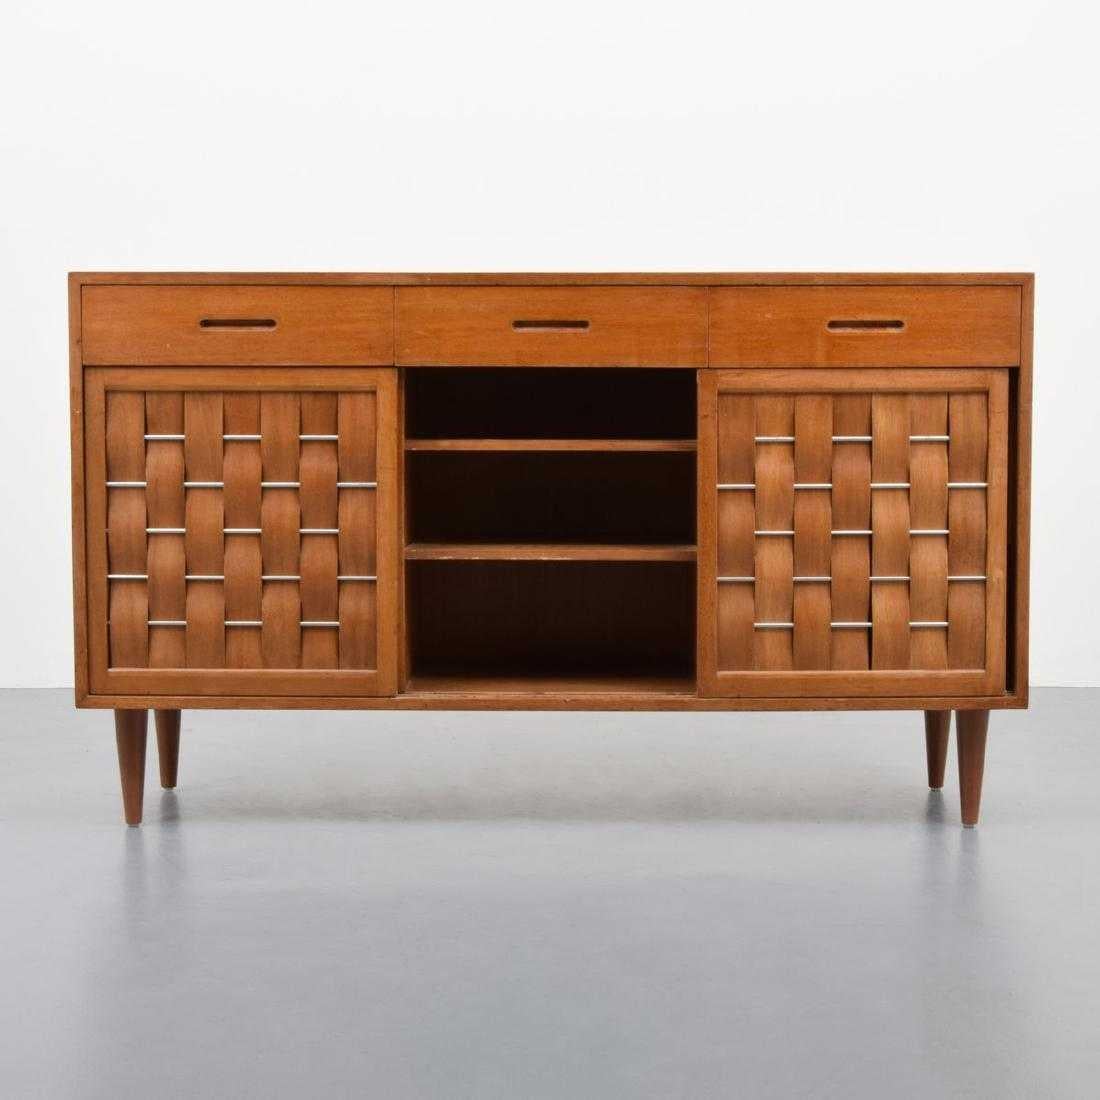 Cabinet by Edward Wormley for Dunbar. Cabinet is model 5665 and has three upper drawers with dividers. One door reveals three pull-out drawers and storage, the middle drawer with two adjustable shelves and the other door has three pull-out drawers